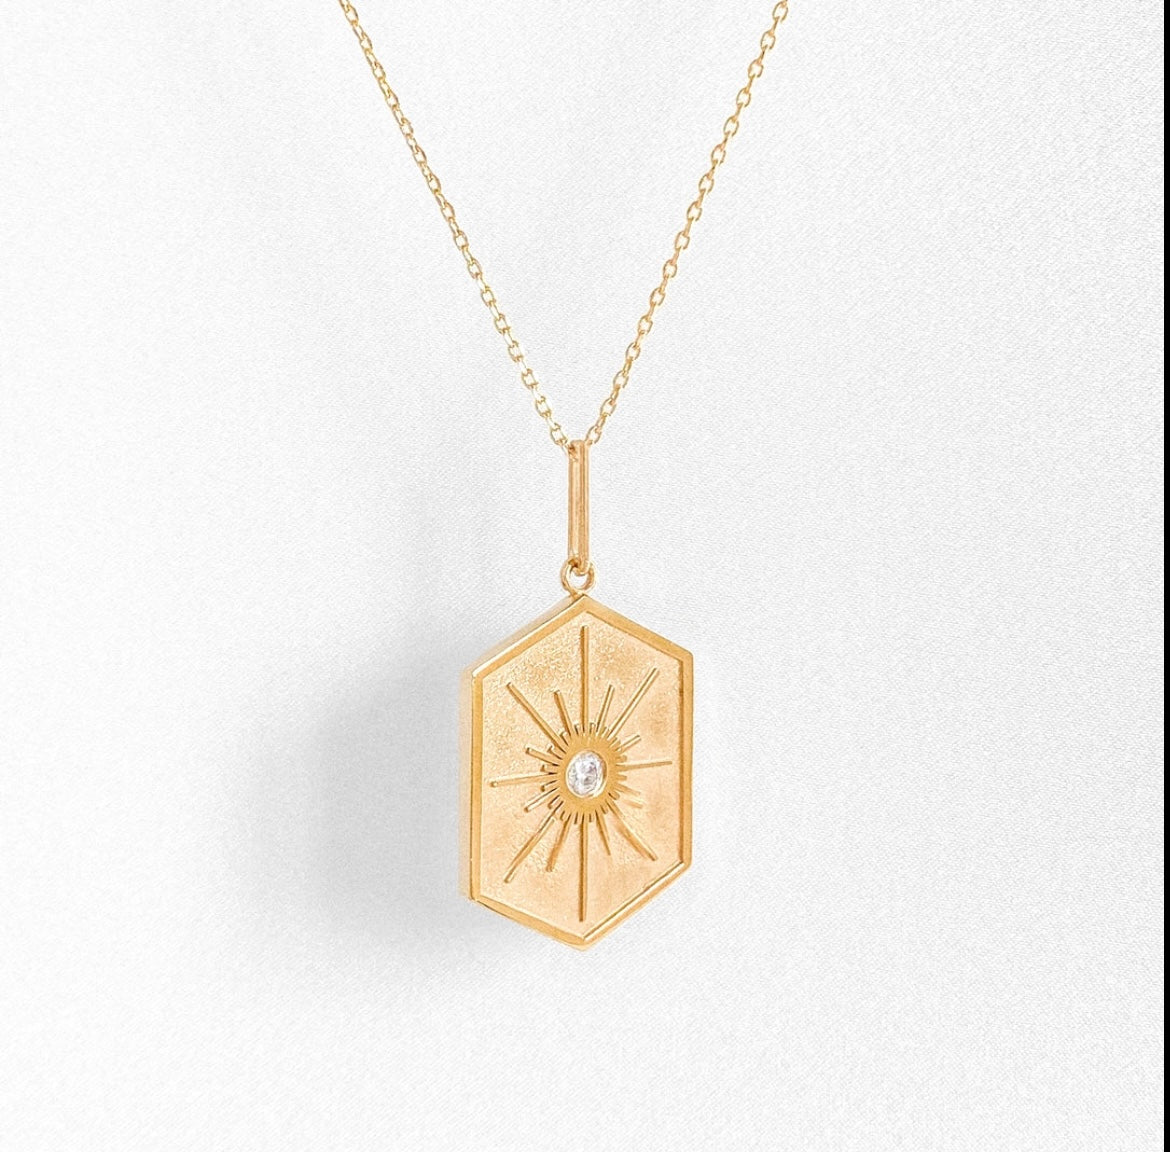 Guiding Star Gold Necklace